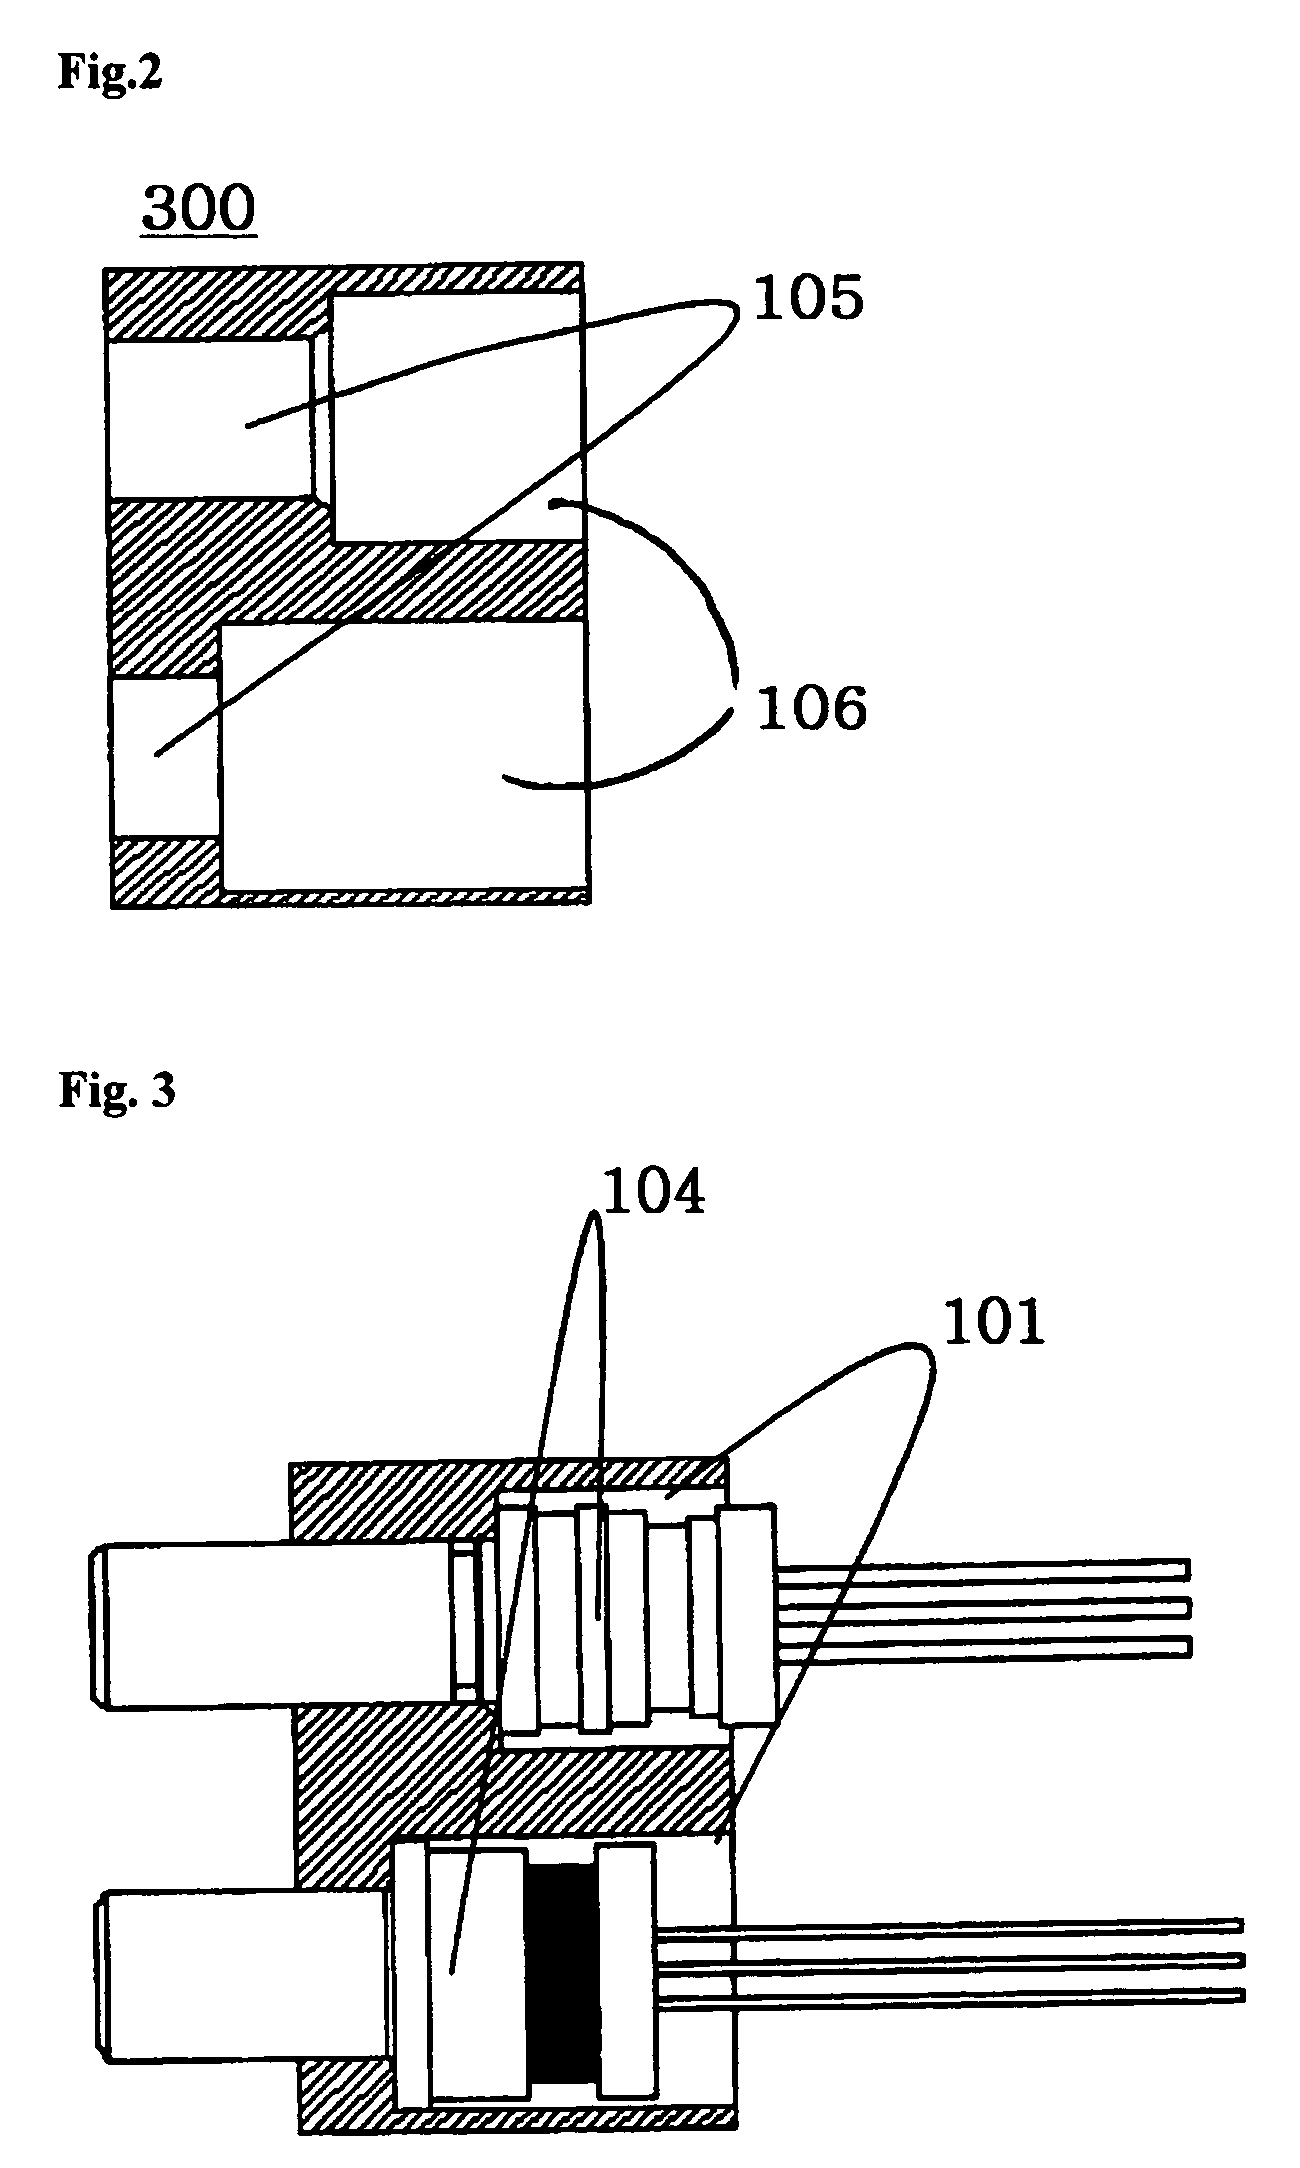 Optical module with accurate axial alignment using a platform